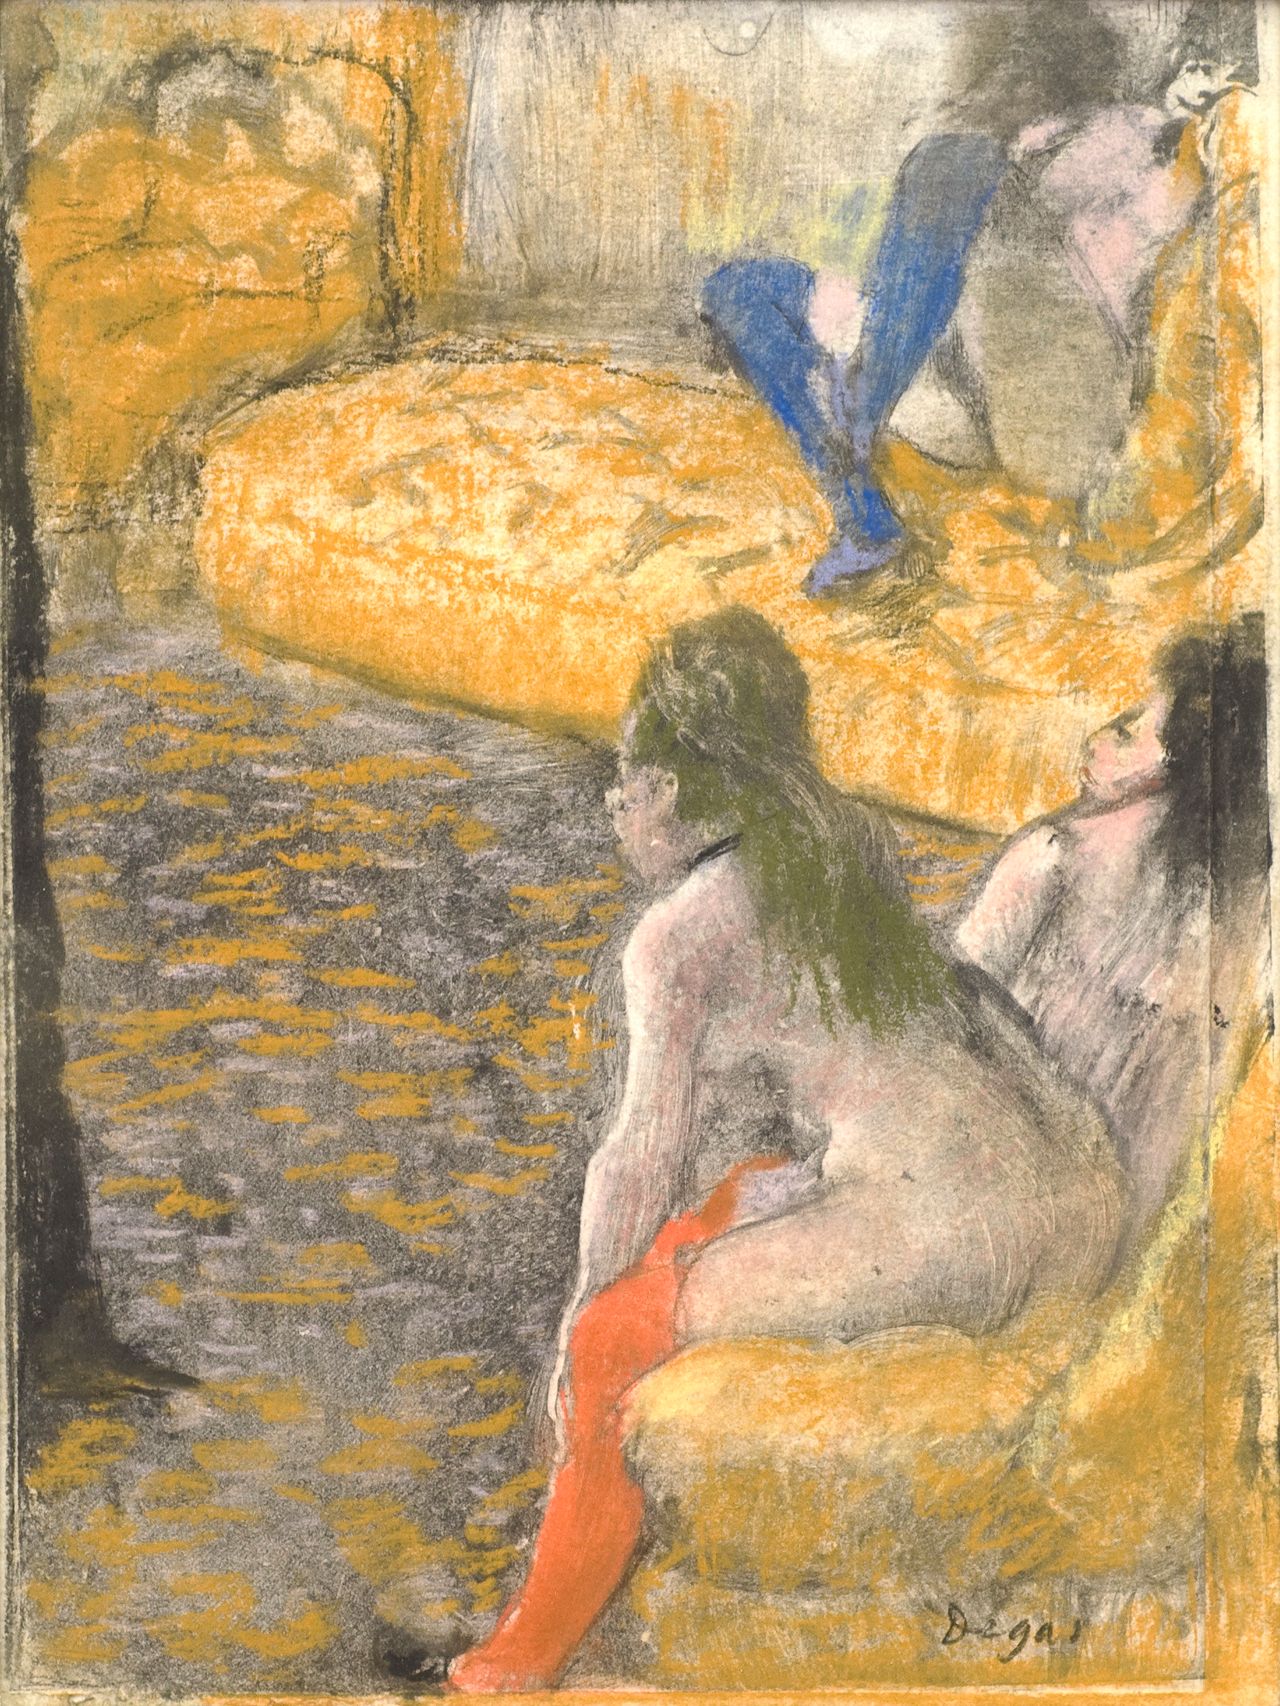 Edgar Degas (French, 1834–1917). Waiting for a Client, 1879. Charcoal and pastel over monotype on paper. Plate: 6 3/8 × 4 3/4 in. (16.2 × 12.1 cm). Private Collection.